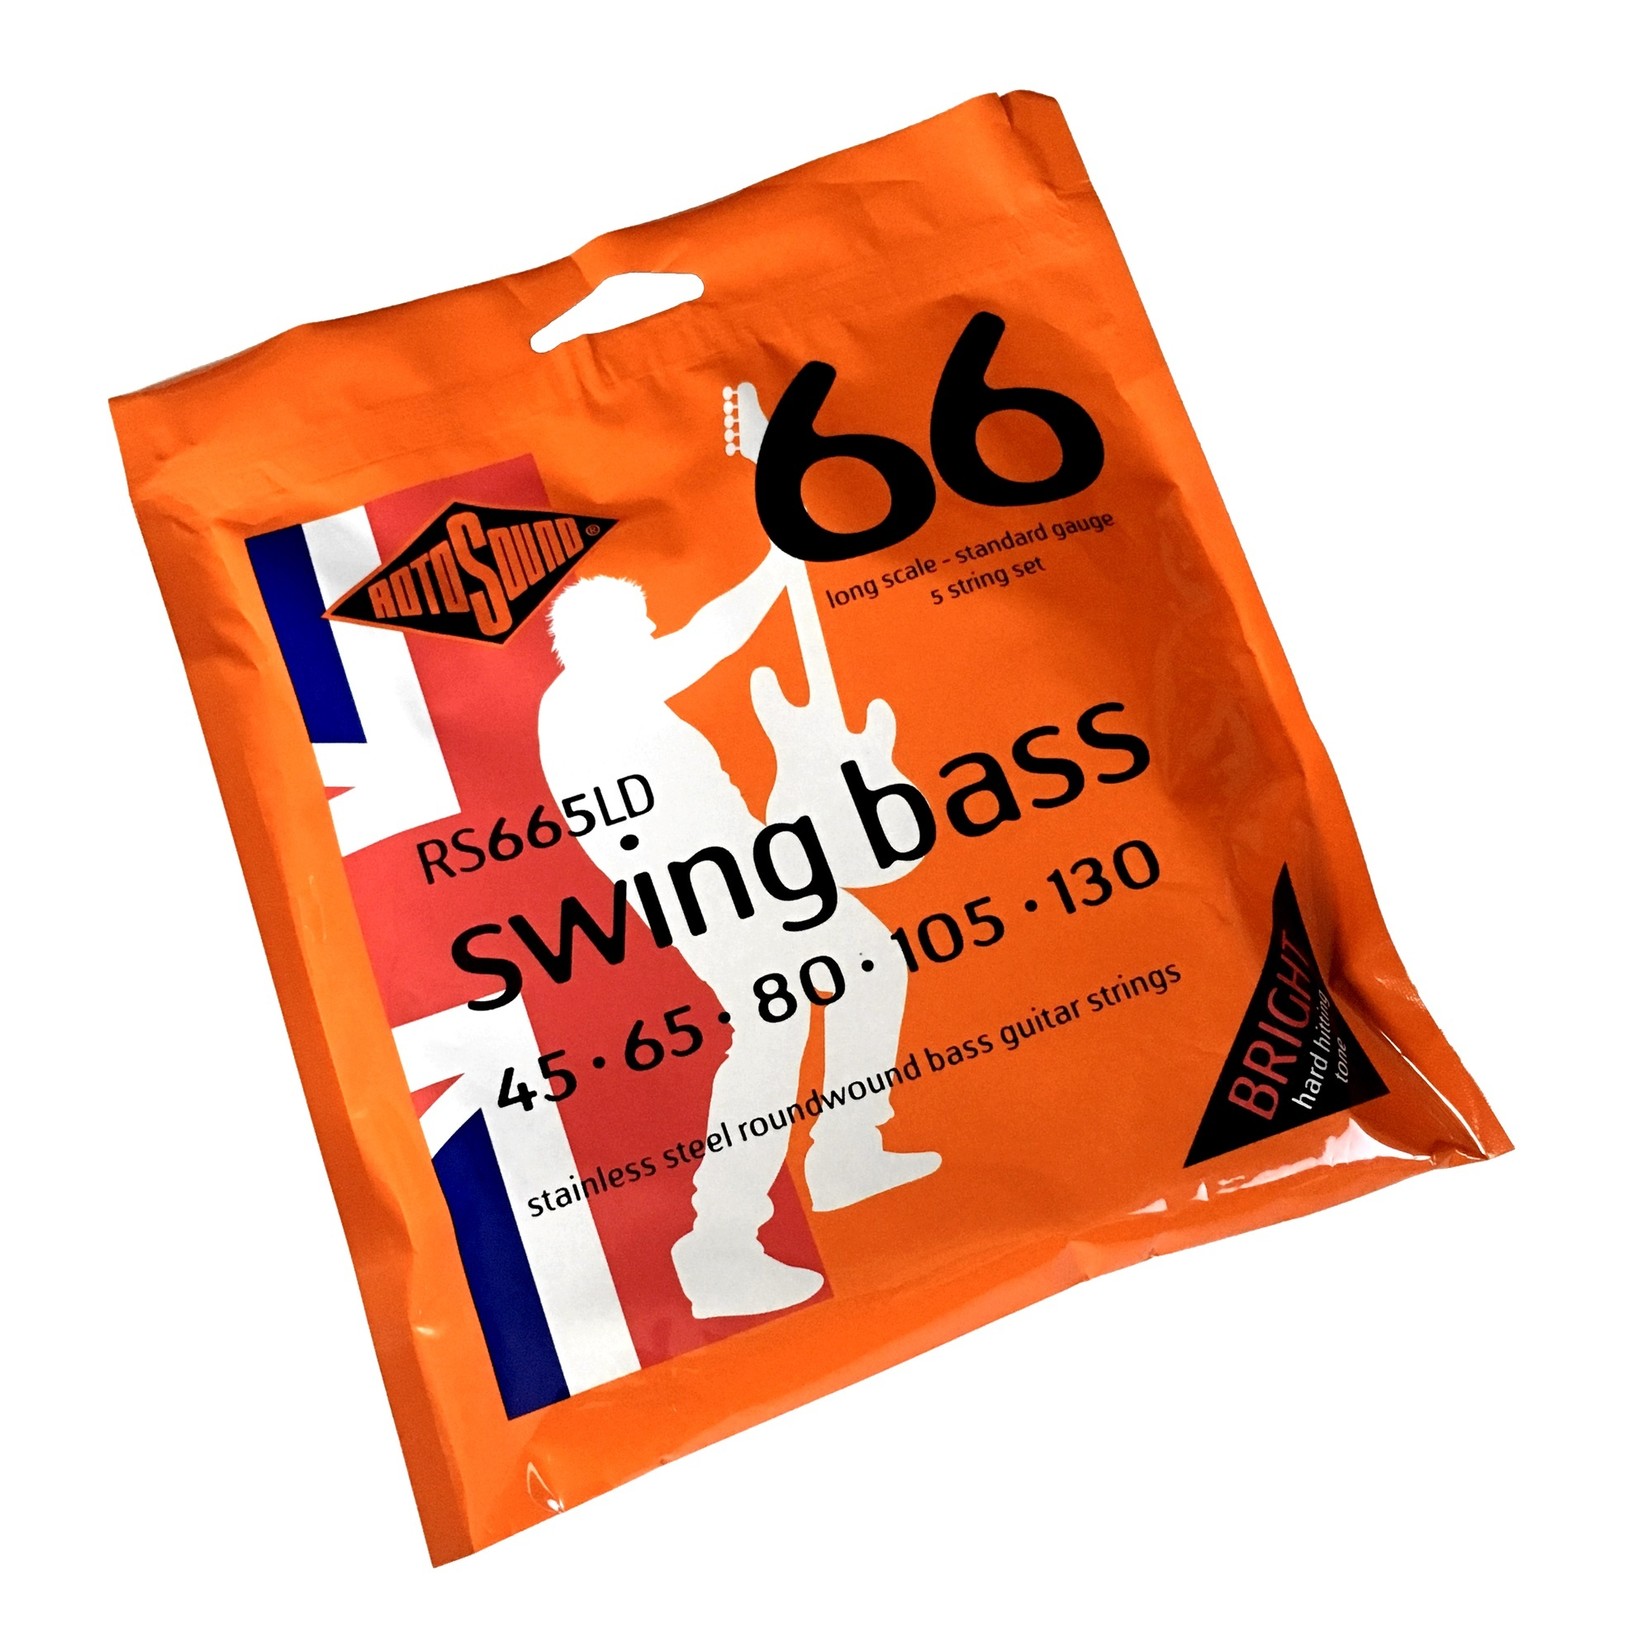 Rotosound Rotosound RS665LD Swing Bass 66 5-String (45-130), Stainless Steel Roundwound Strings